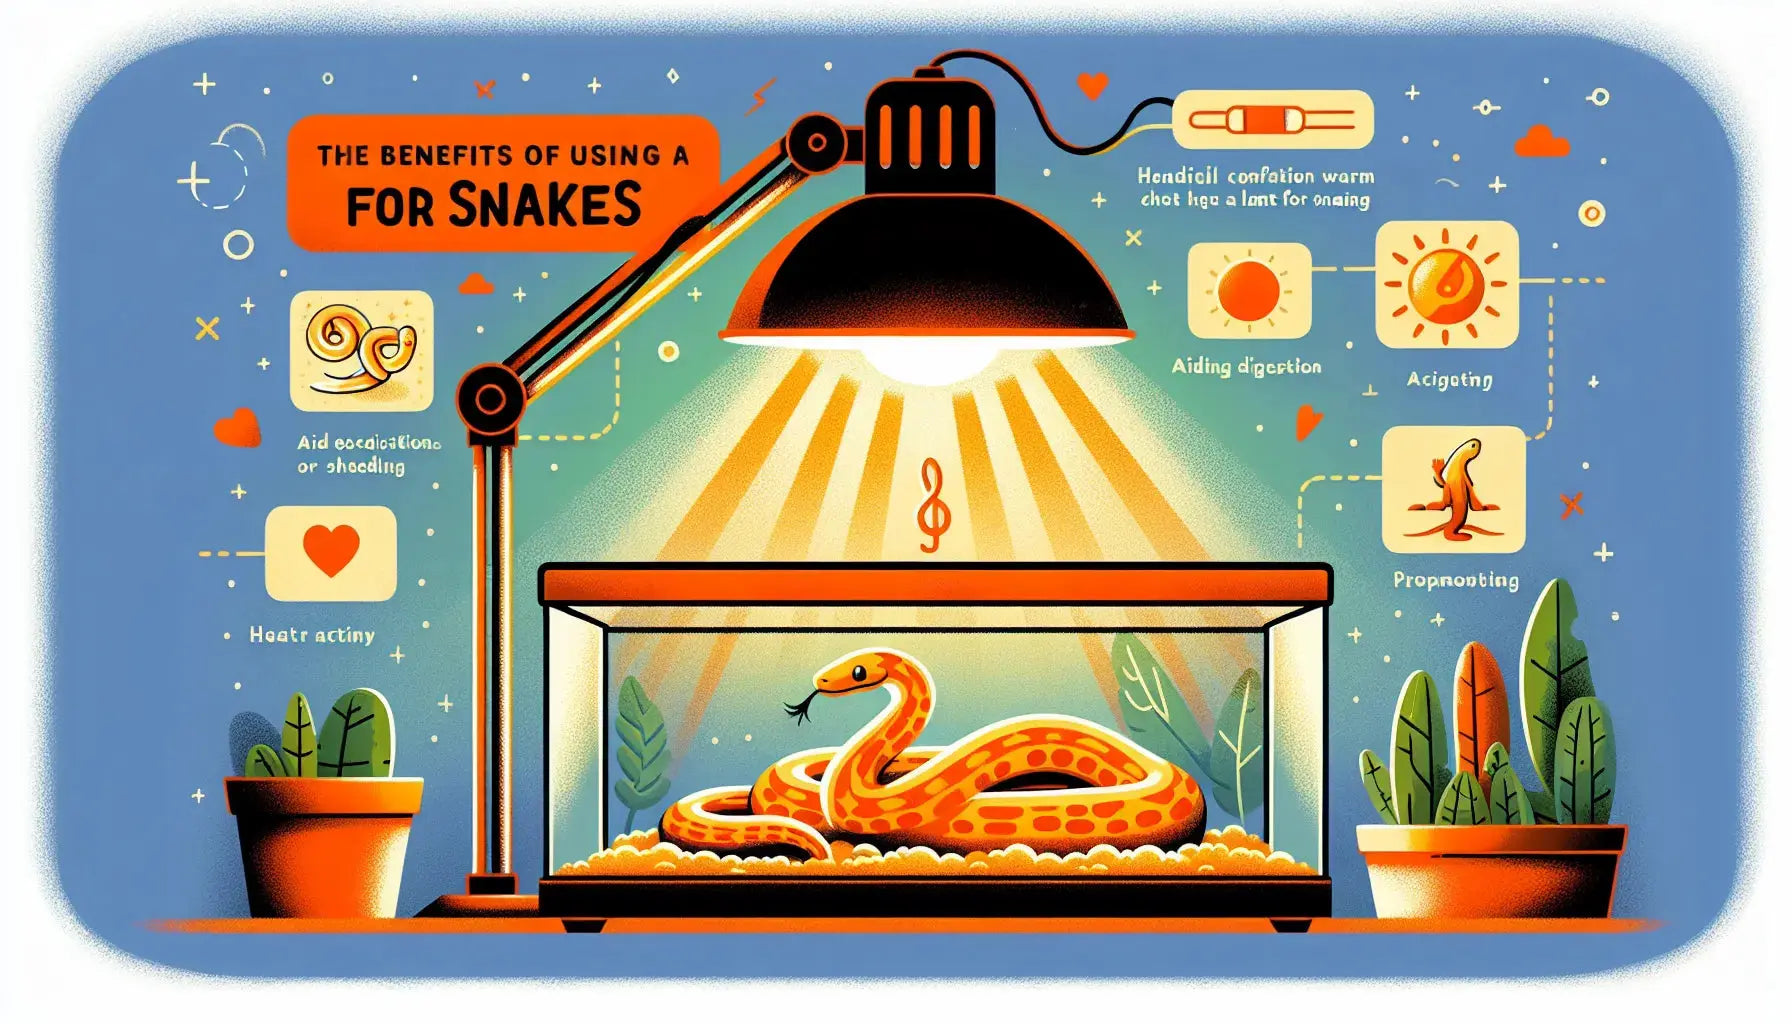 The Benefits of Using a Heat Lamp for Snakes